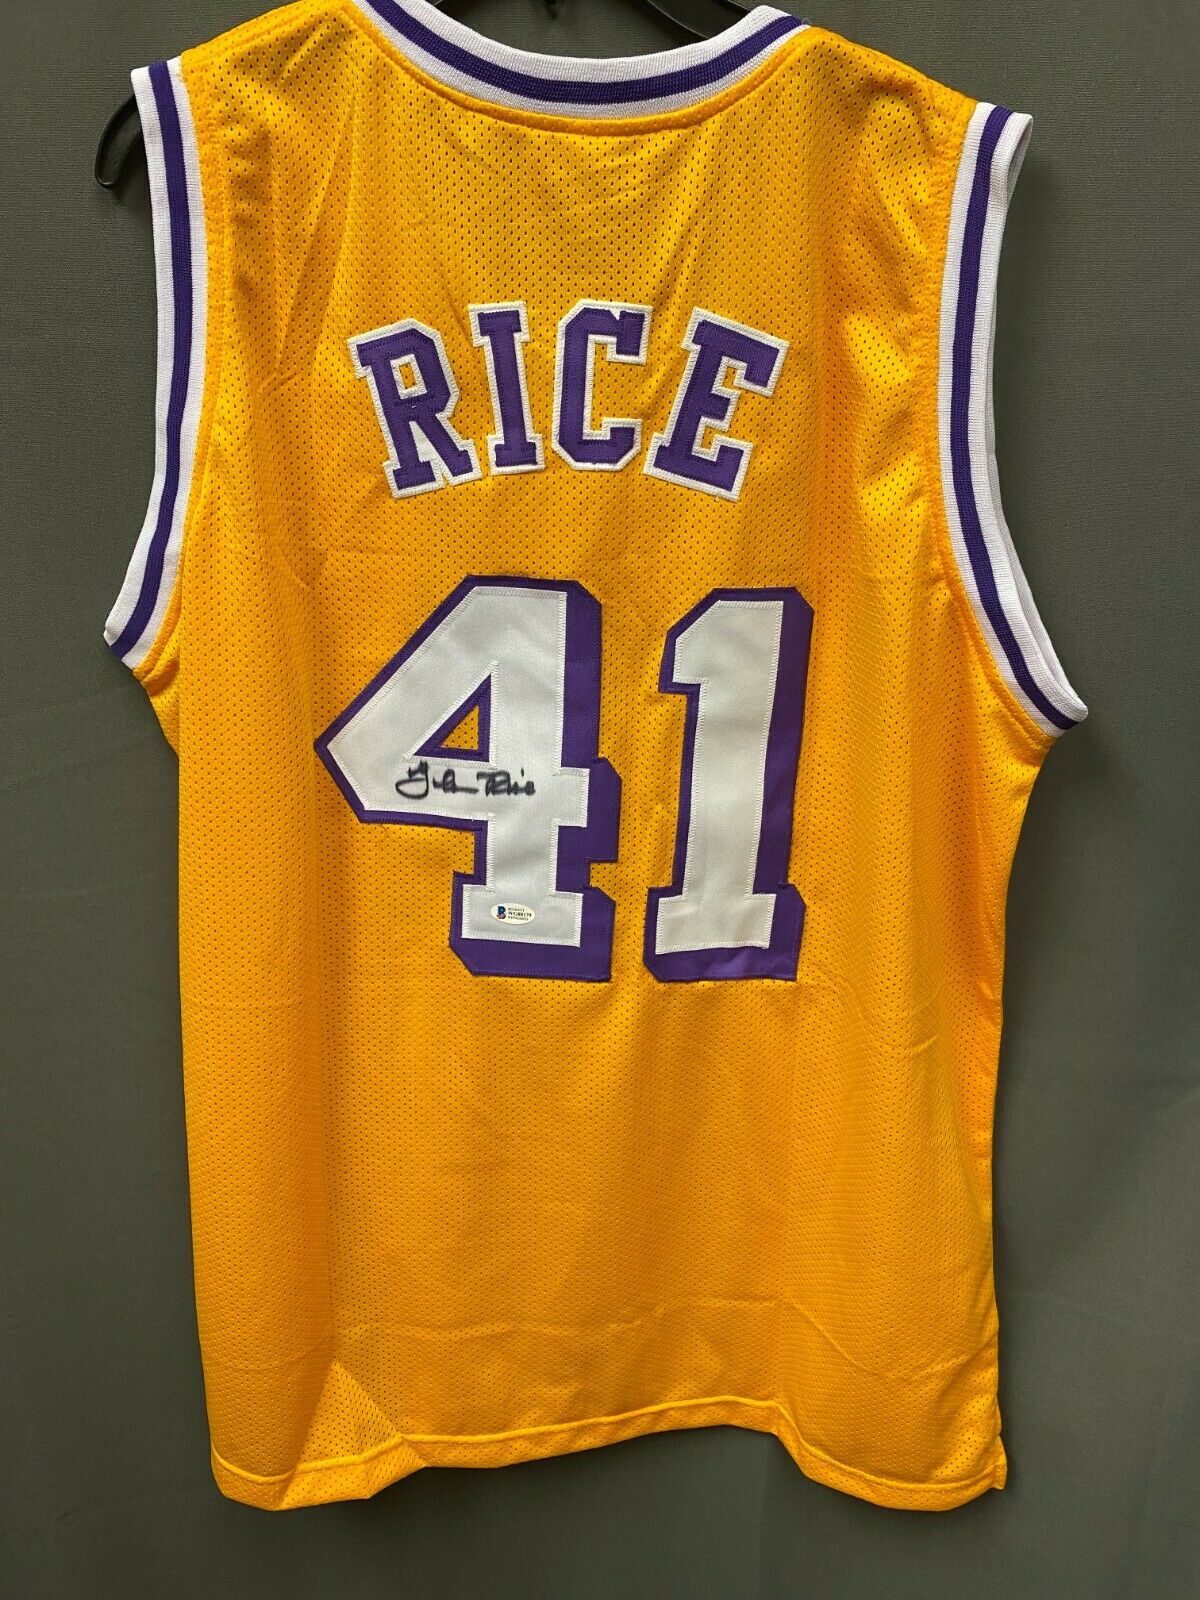 Glen Rice #41 Signed Lakers Basketball Jersey Auto Bas Witnessed Holo Sz Xl